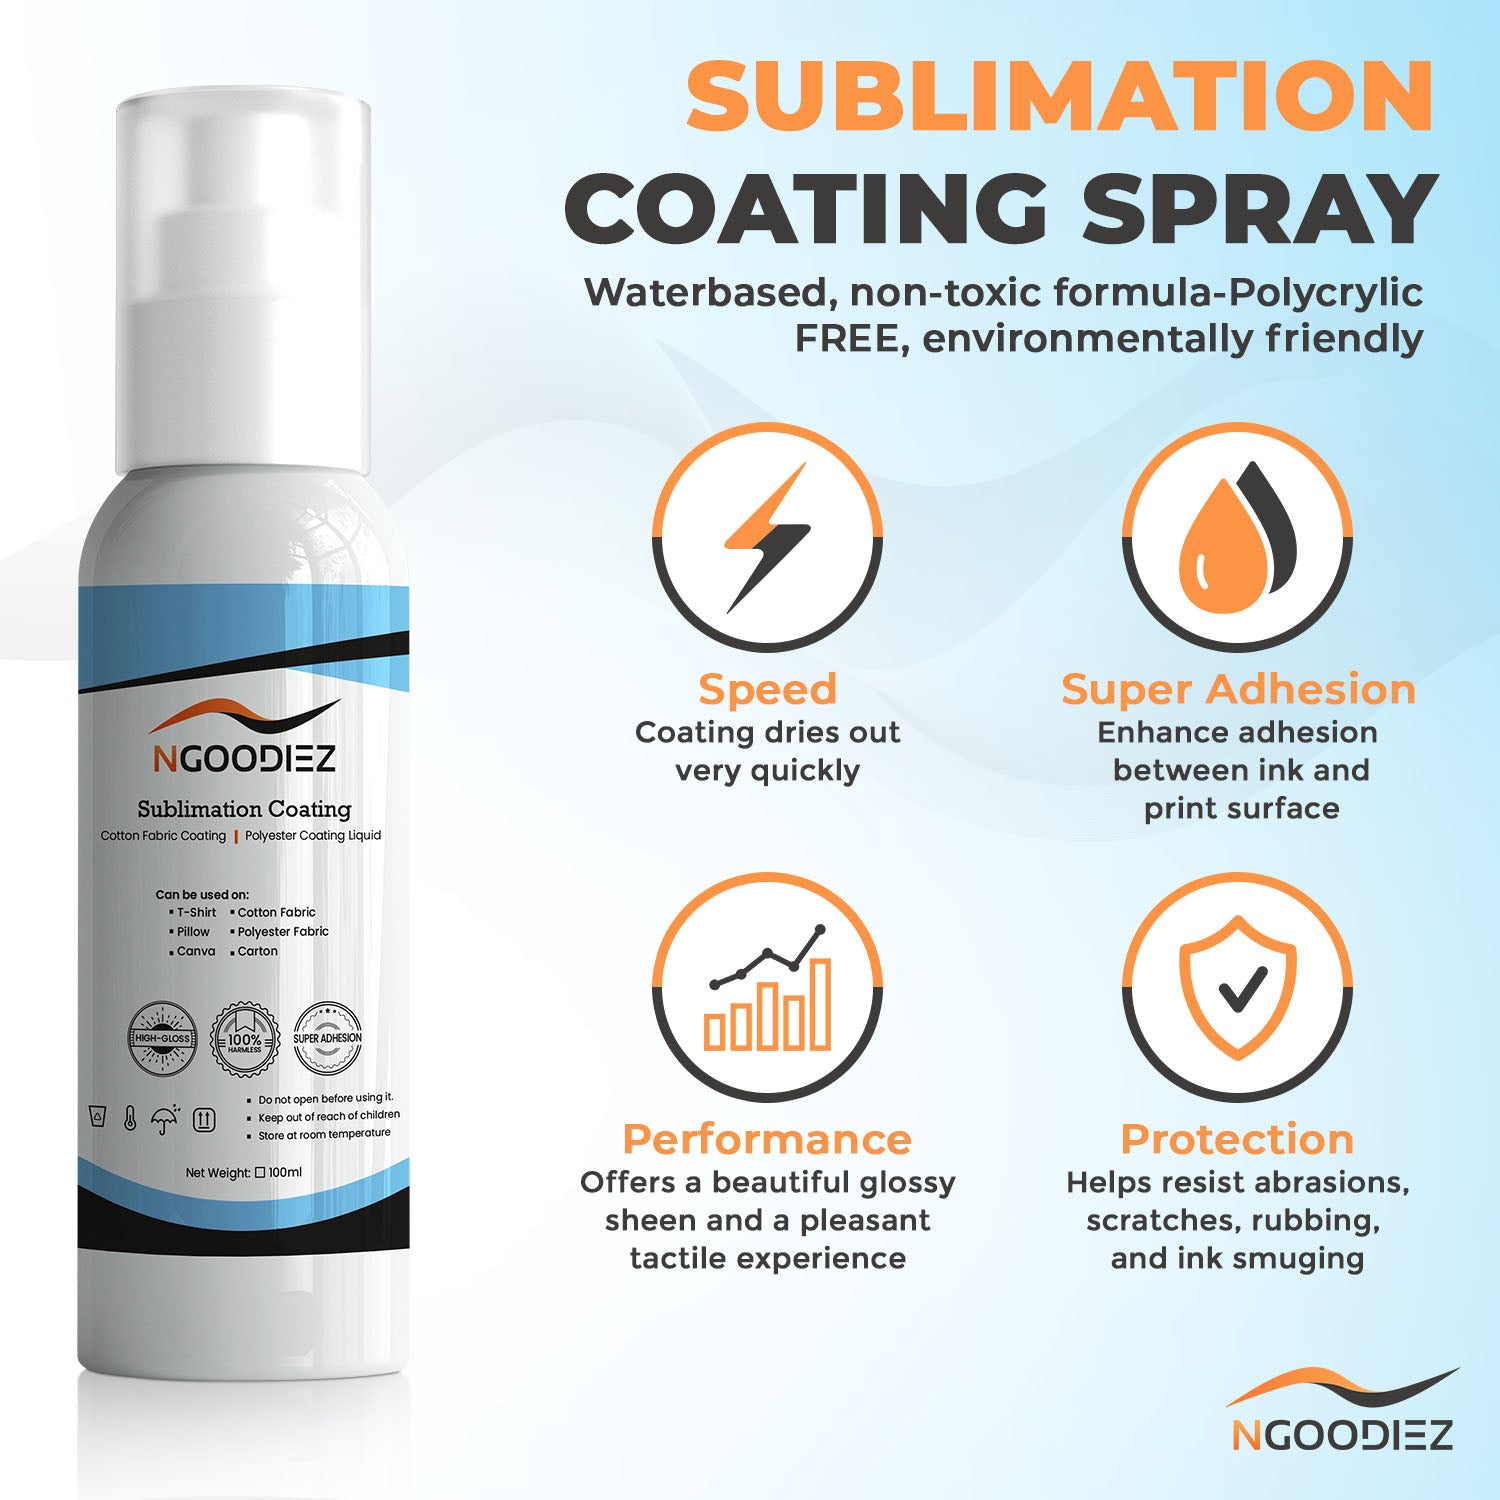 NGOODIEZ Sublimation Coating Spray for All Fabric, 33.8 Fl Oz (Pack of 1)